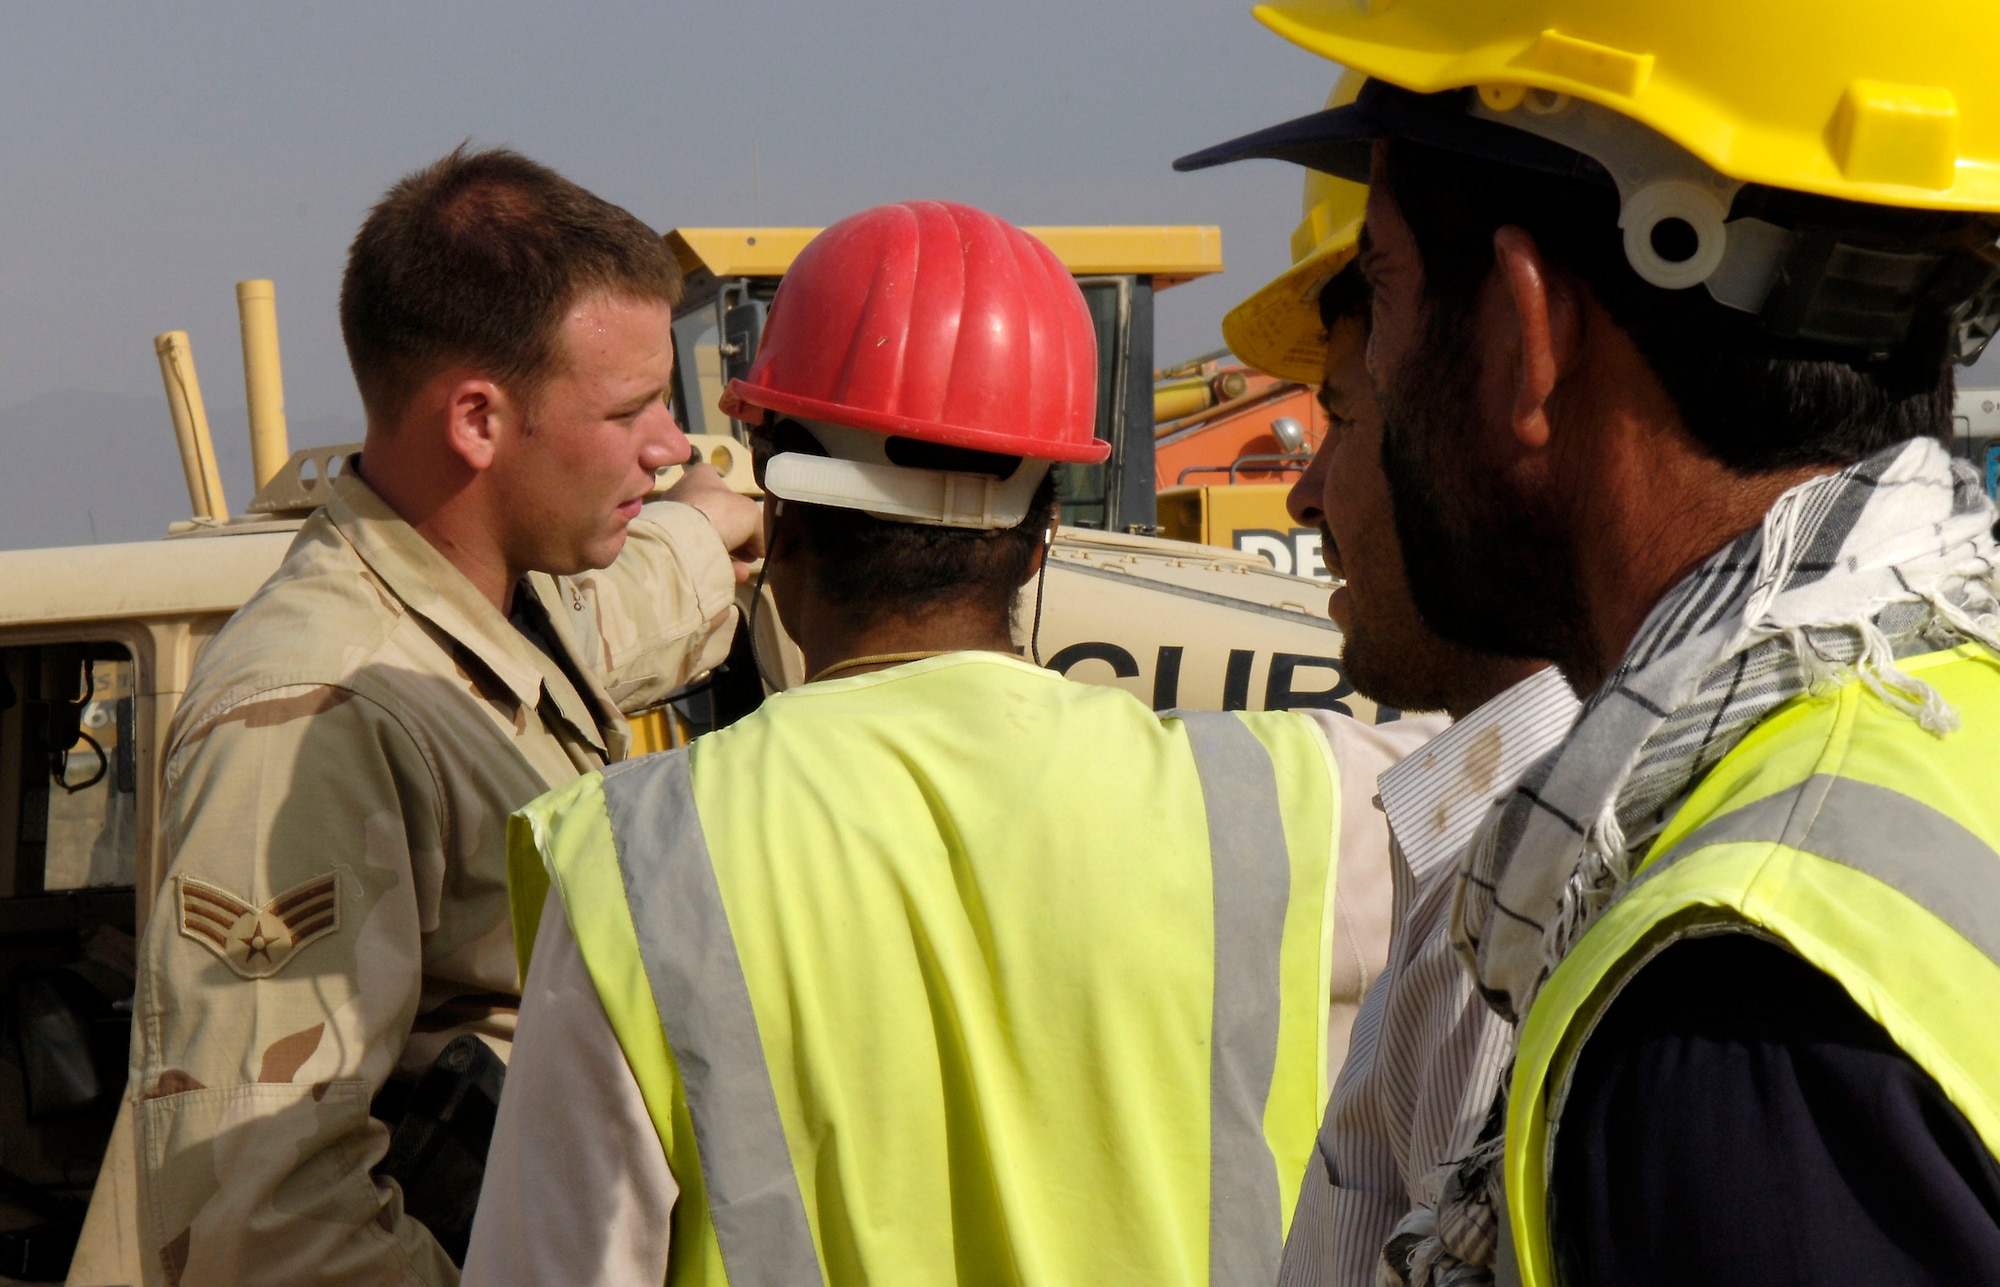 Senior Airman Robert Elliott talks with one of the Afghan workers extending the flight line ramp here at Bagram Air Base, Afghanistan, Aug 24, 2006.  Airman Elliott is a force protection escort here.  He is deployed from Pope Air Force Base, NC.  
(U.S. Air Force photo/Senior Airman Brian Ferguson)

